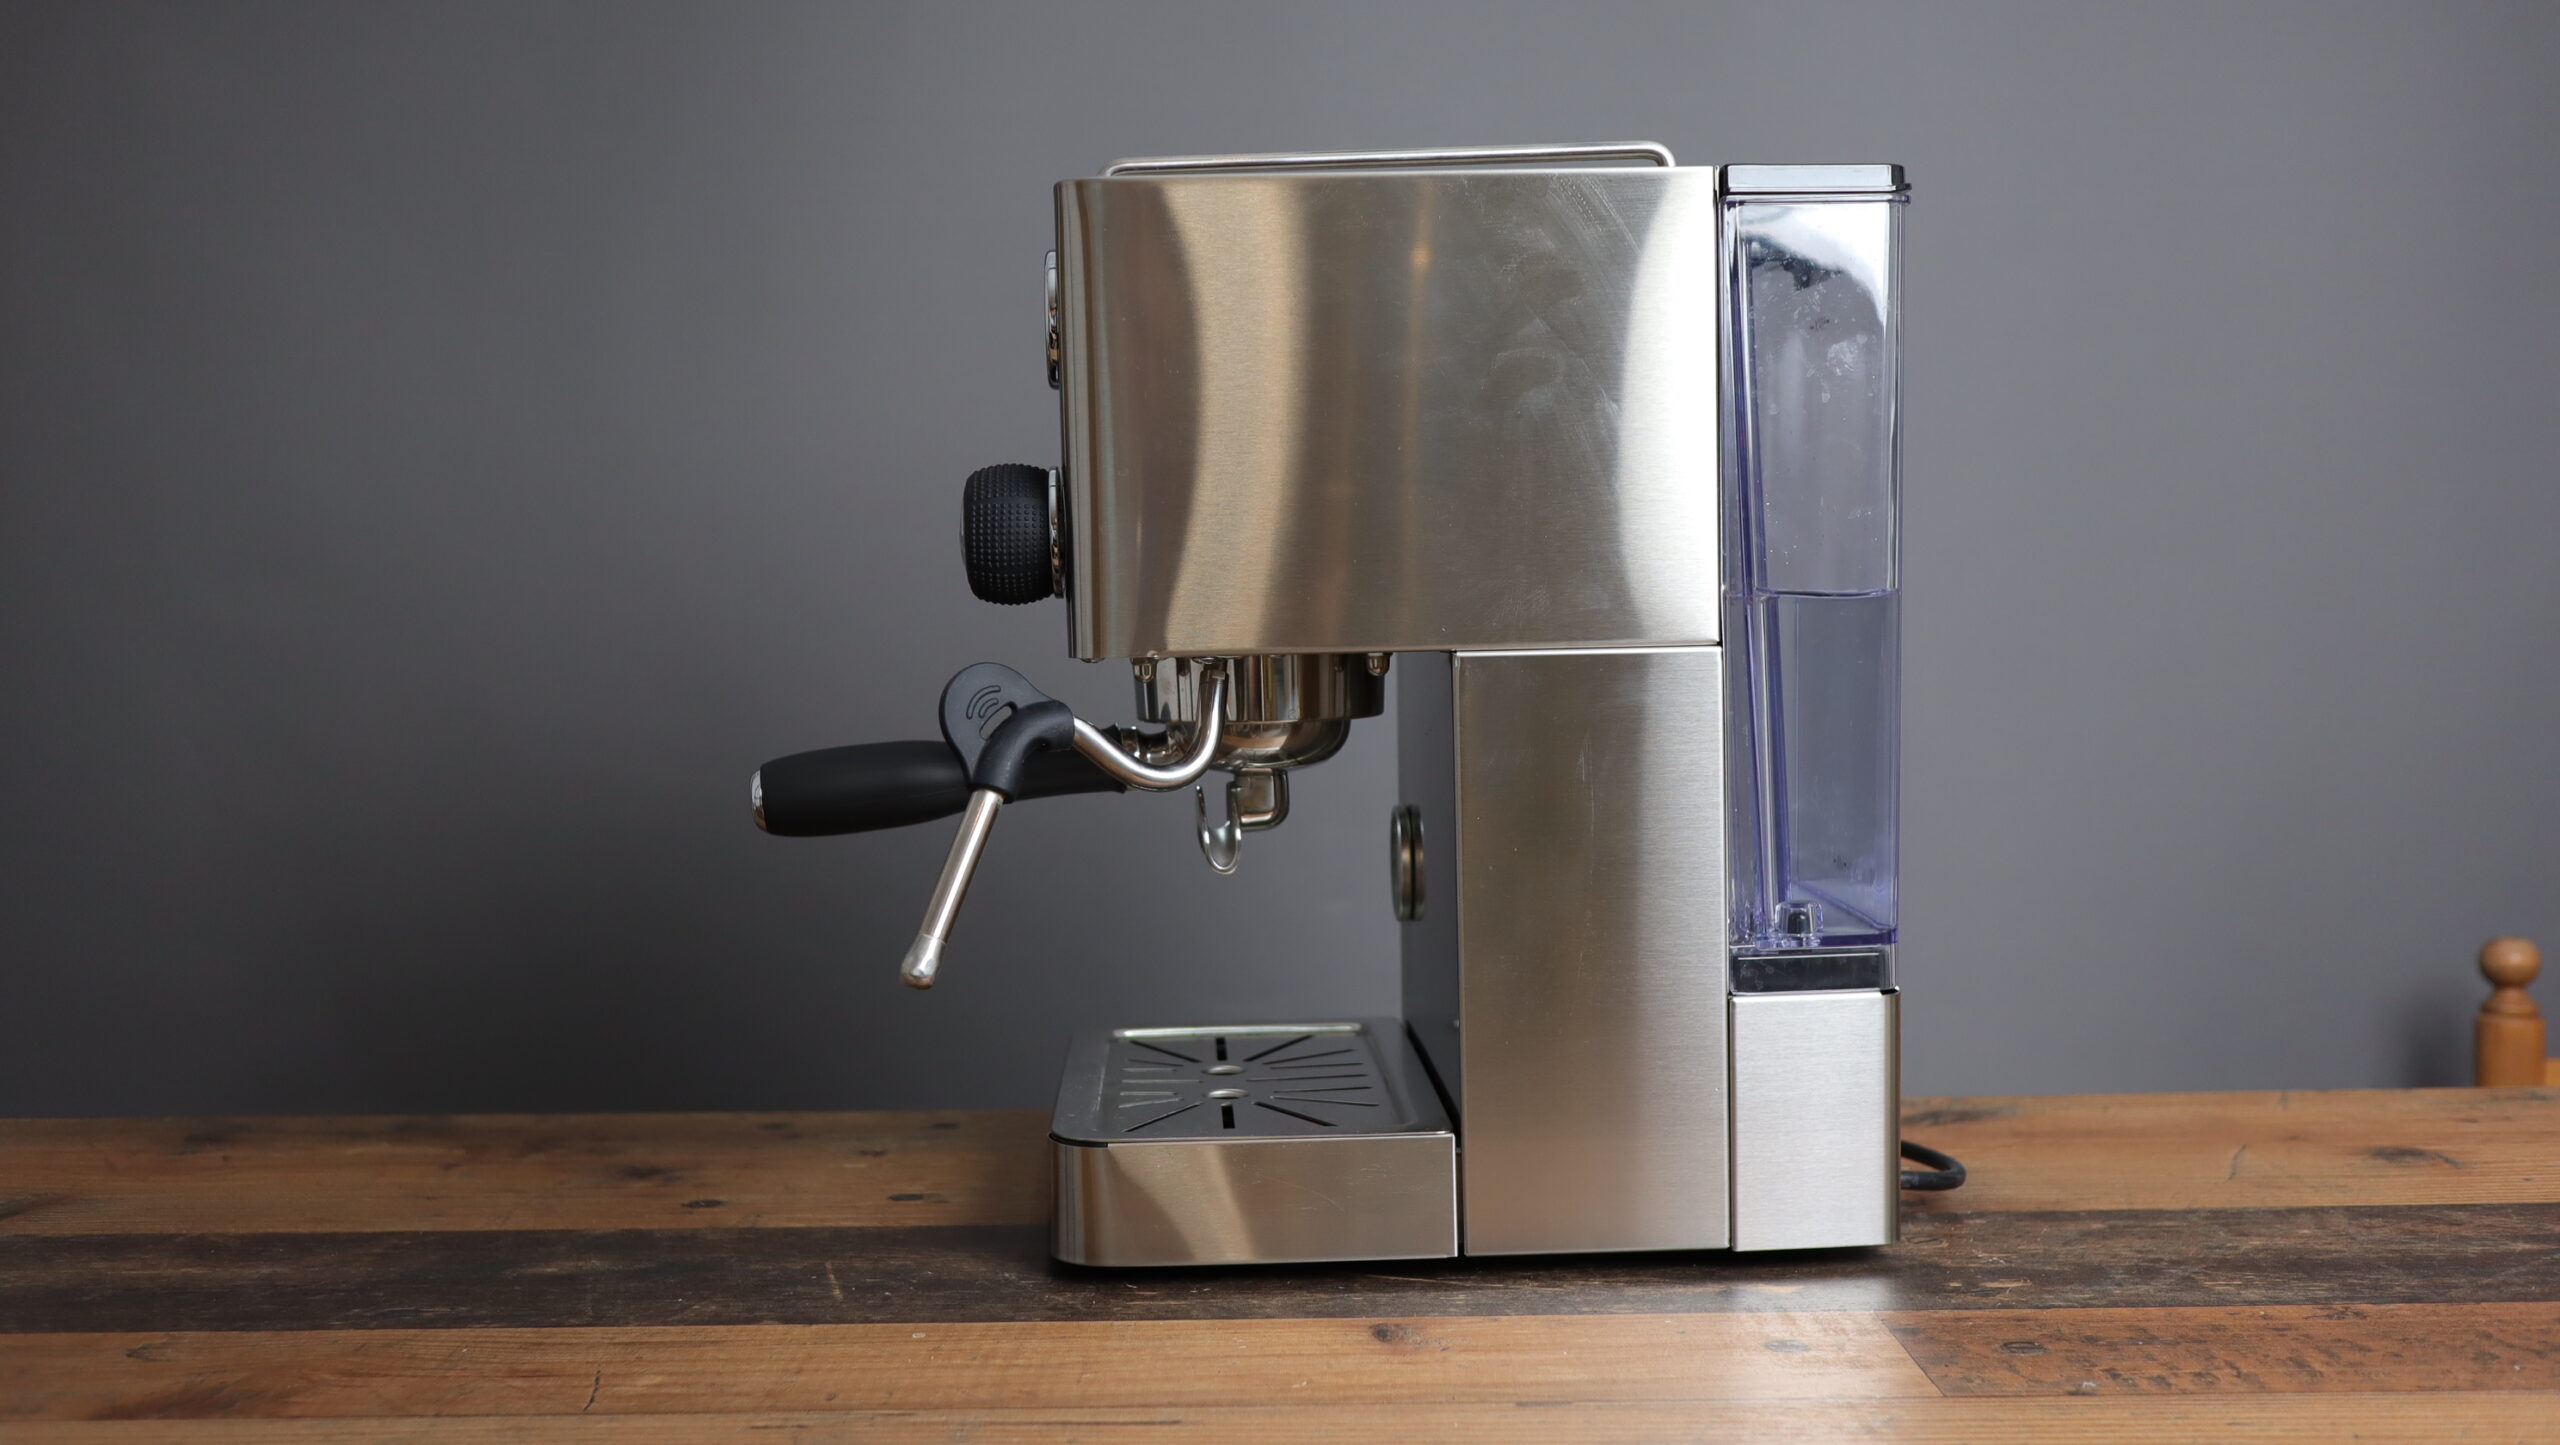 The MiiCoffee Apex viewed from the right, with articulating steam wand